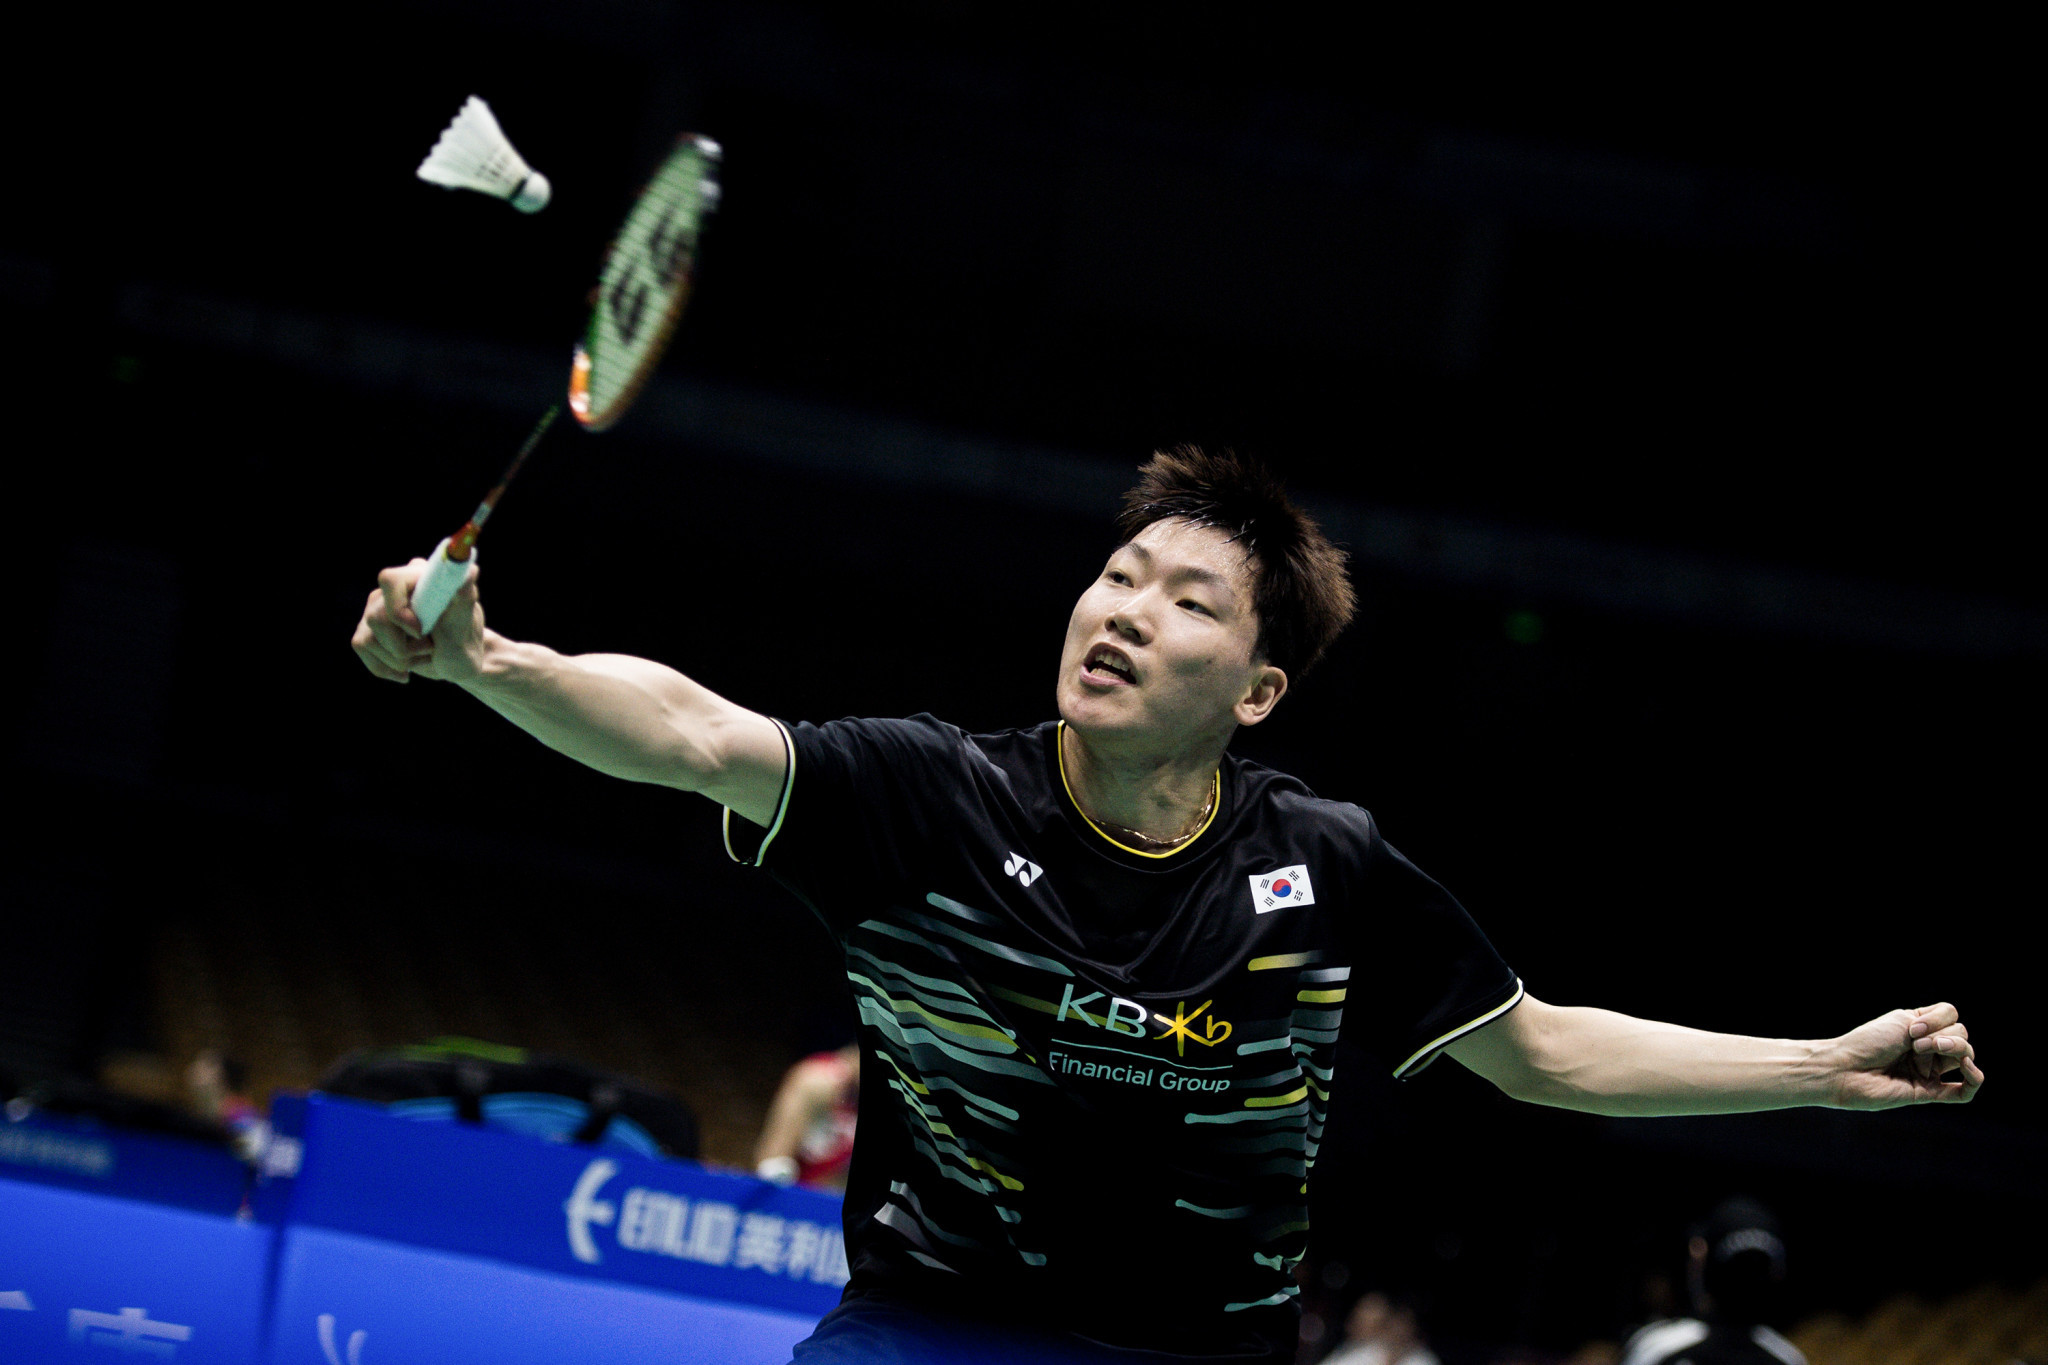 Top seed Lee fights back to reach quarter-finals at BWF US Open